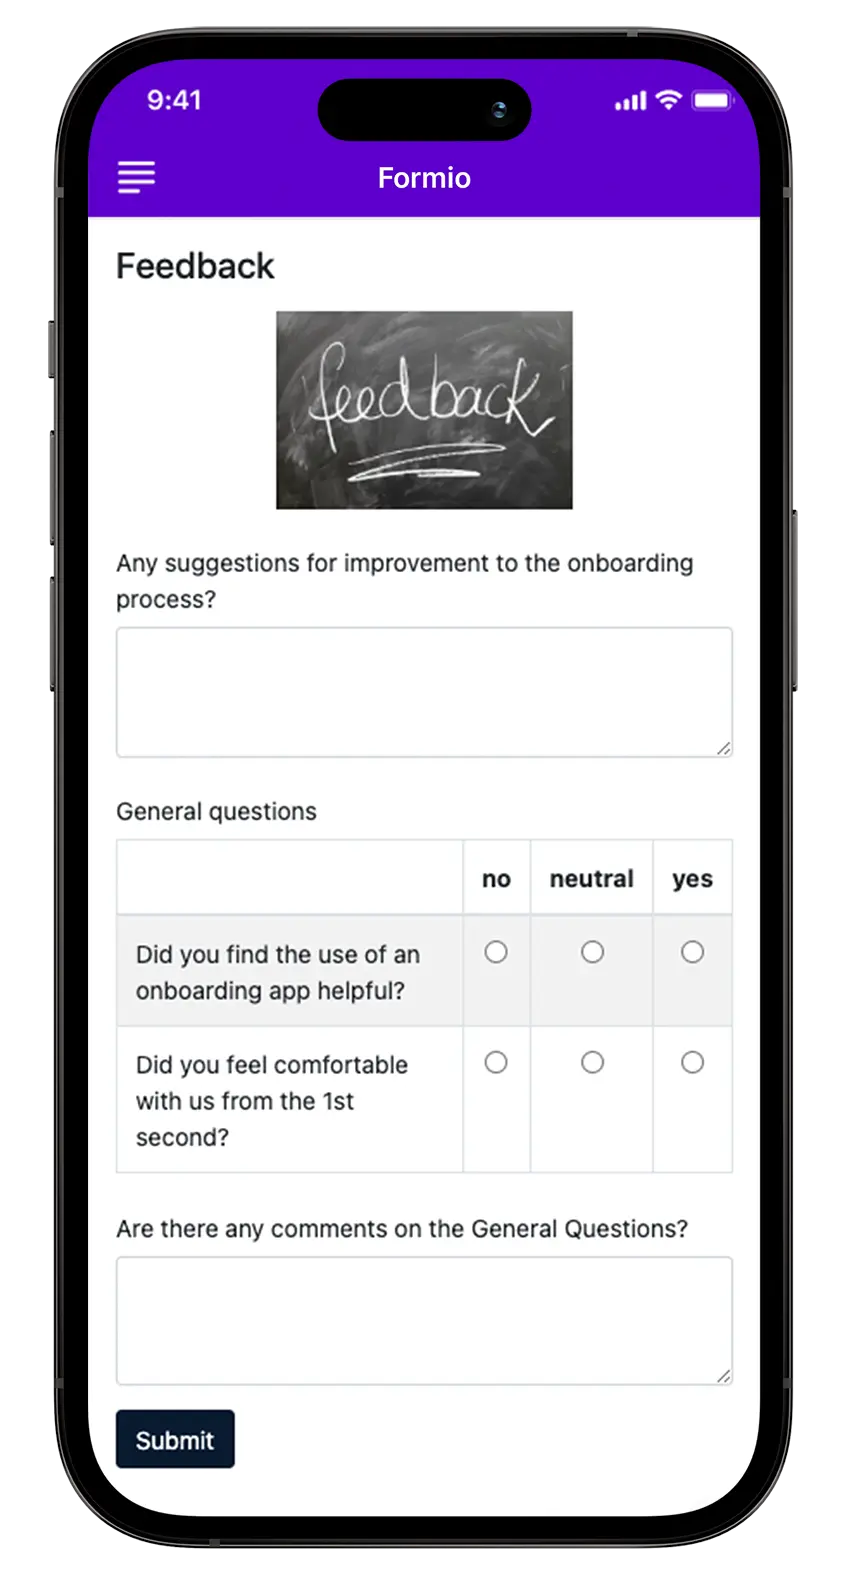 Example of a feedback form in the onboarding app